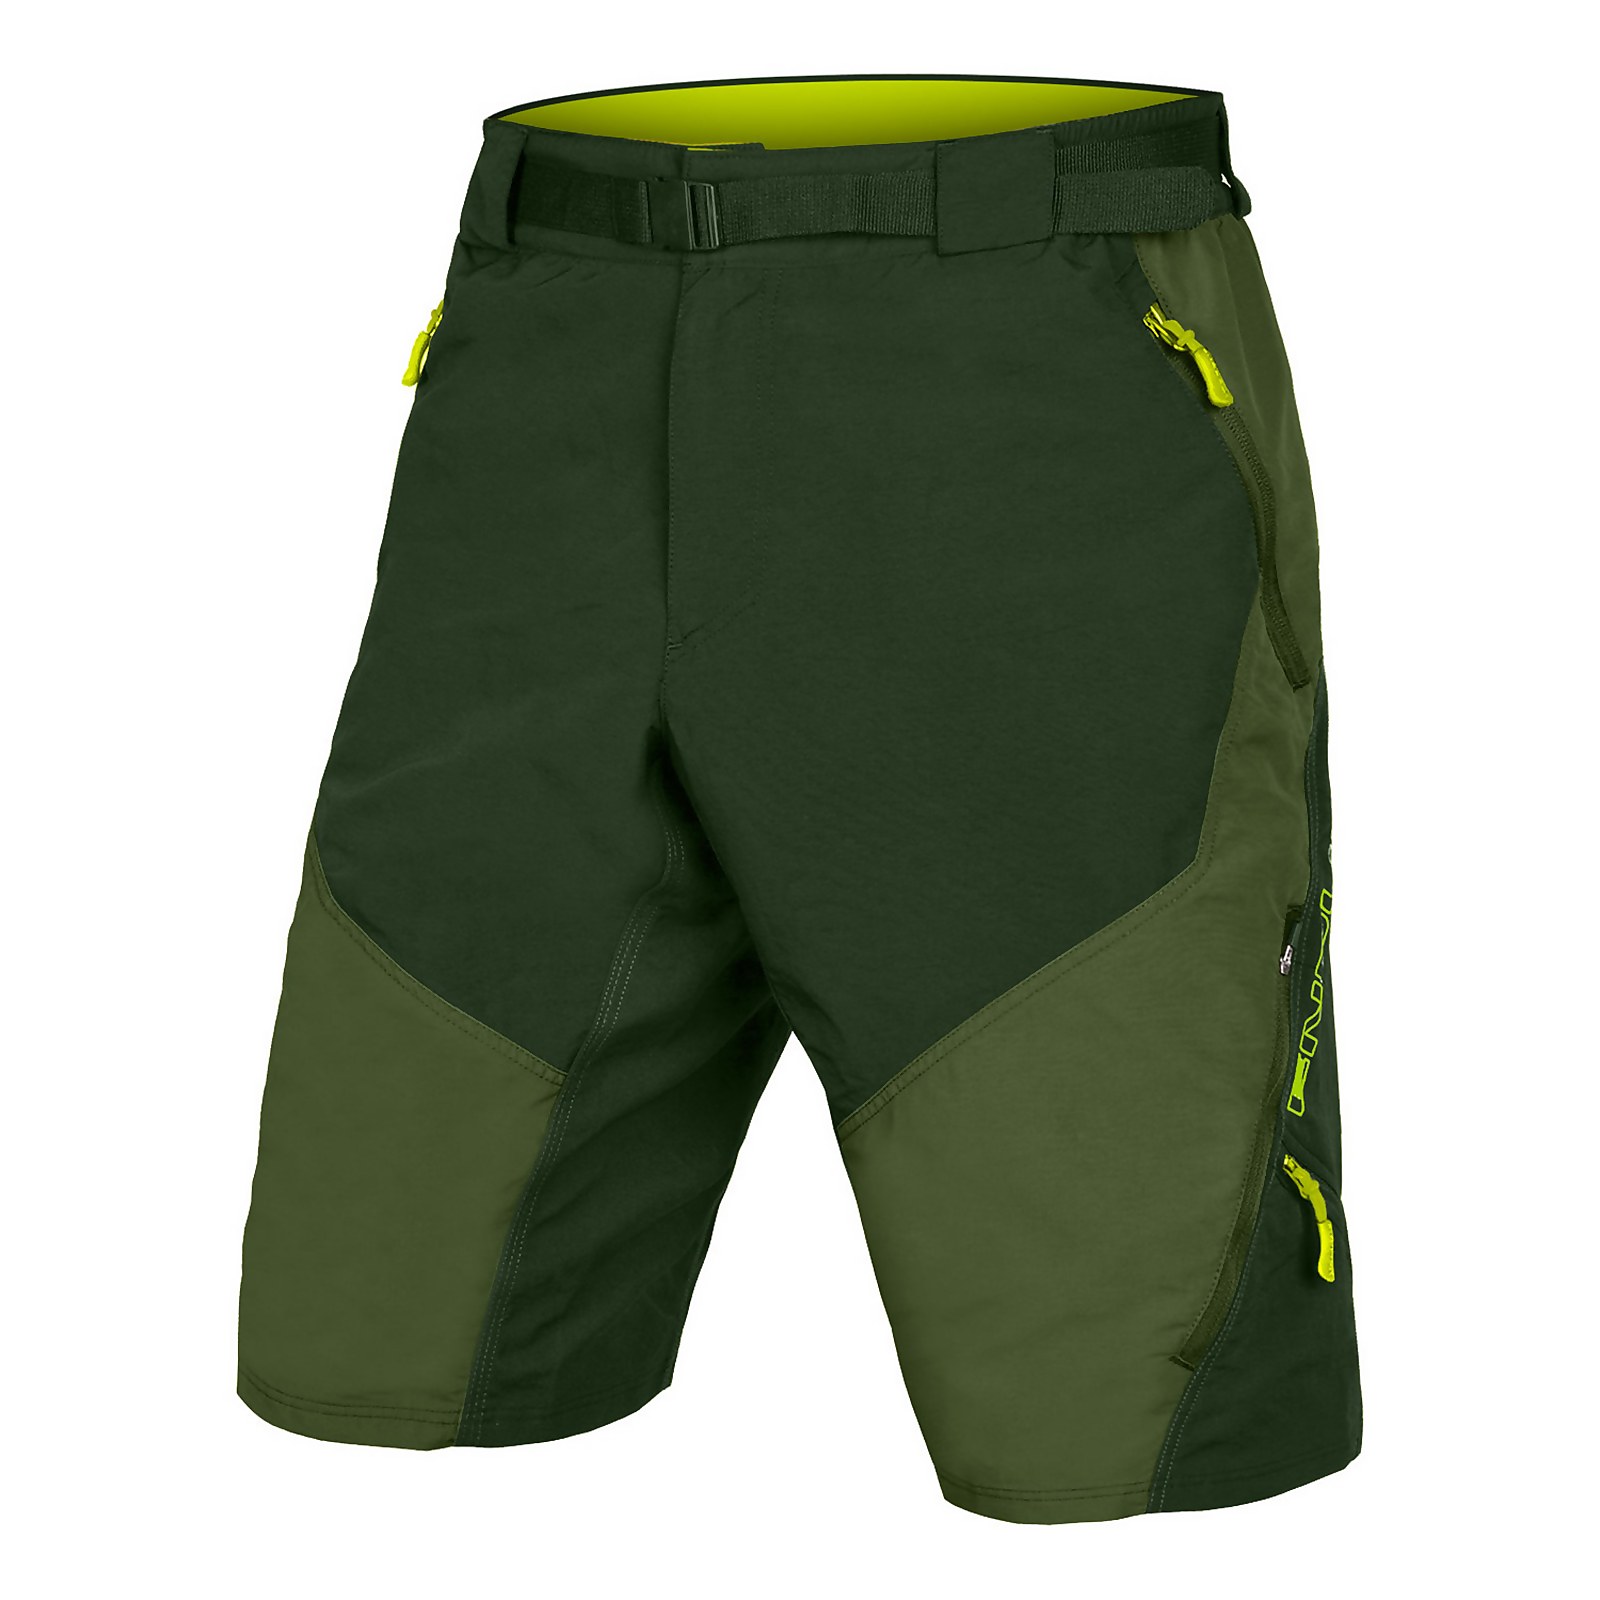 Hummvee Short Ii With Liner - Olive Green